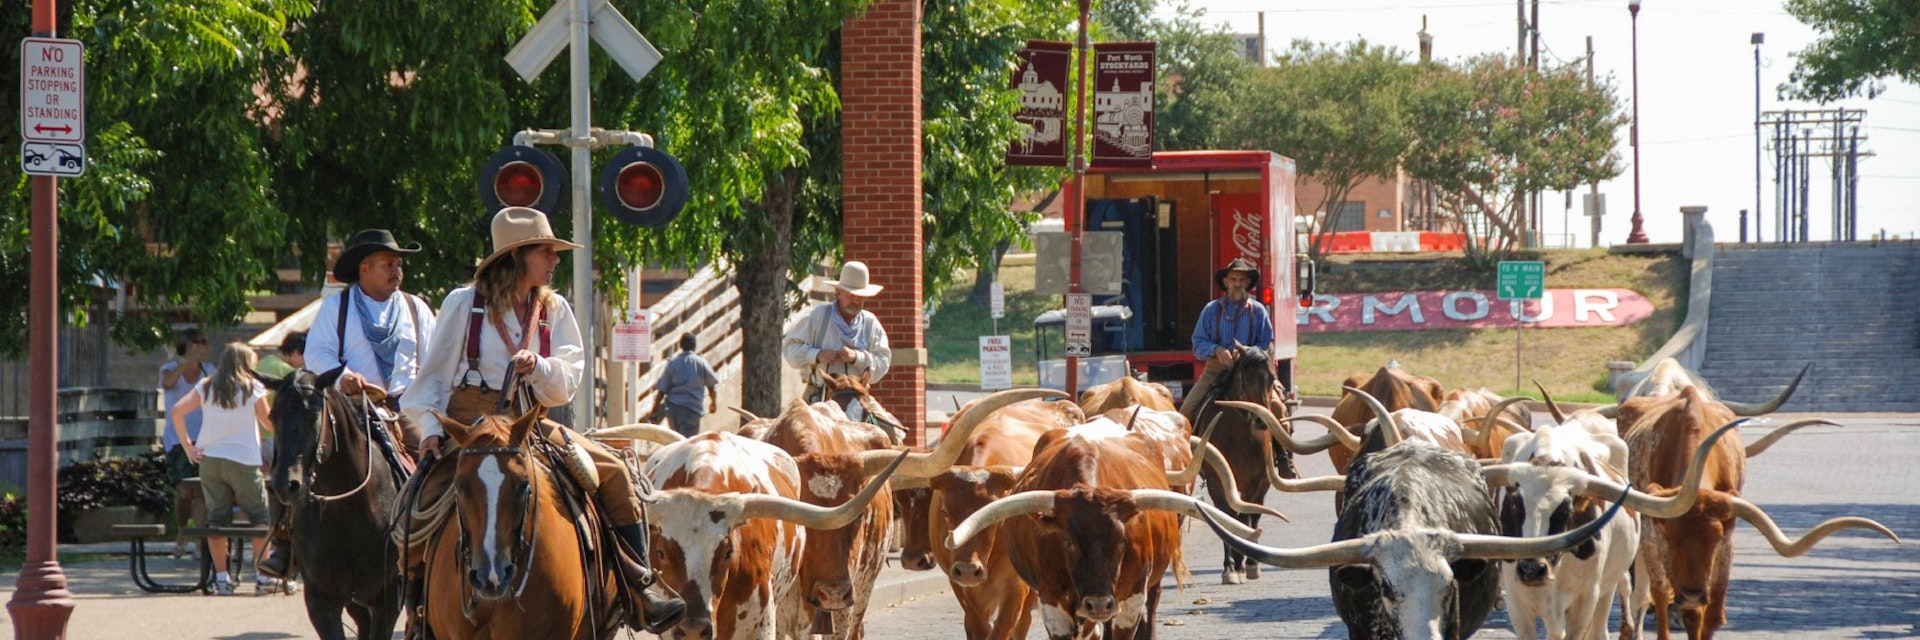 Parade of cowboys and steer cattle in the Fort Worth Stockyards in Texas - stock photo
Fort Worth, Texas - September 2009: A herd of cattle parading through the Fort Worth Stockyards accompanied by cowboys on horseback